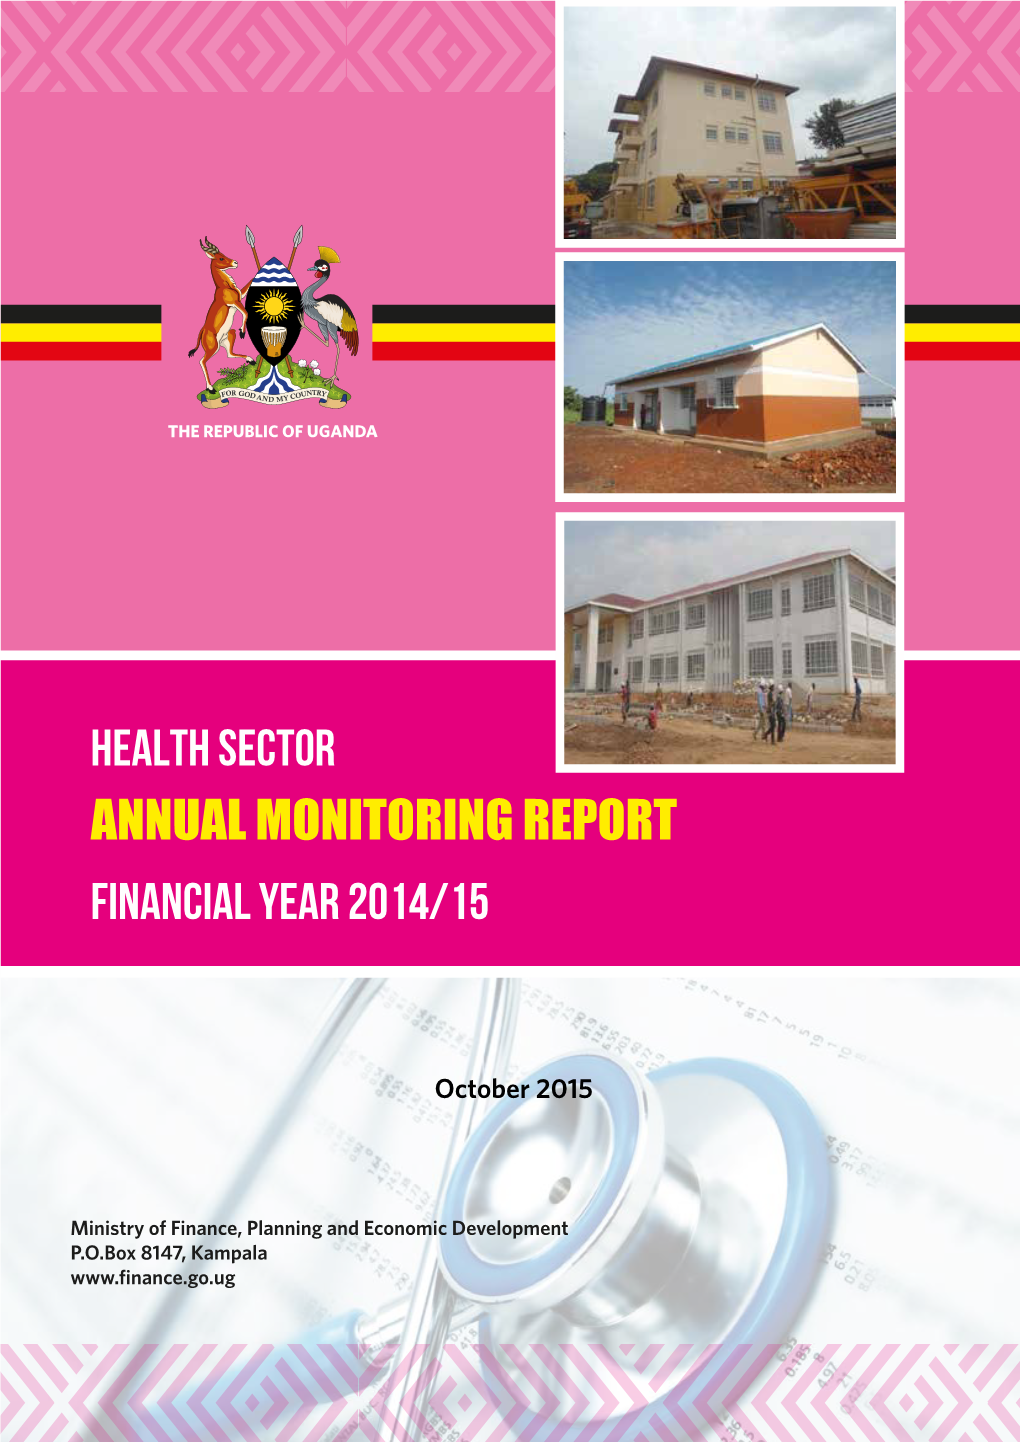 Health Sector ANNUAL MONITORING REPORT Financial Year 2014/15